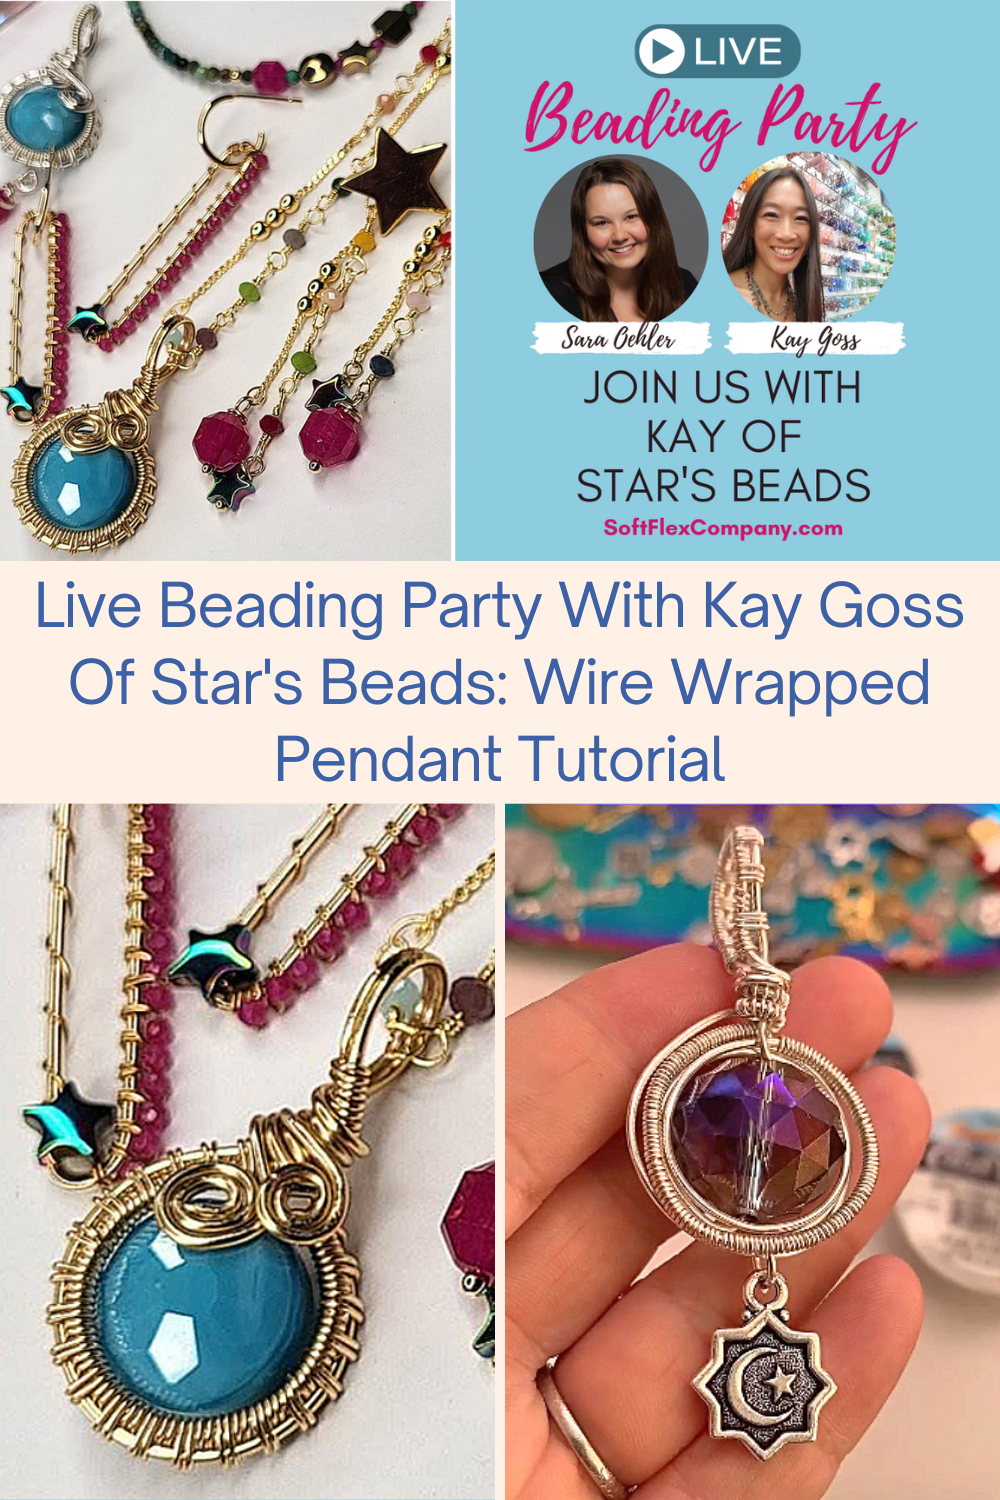 Live Beading Party With Kay Goss Of Star's Beads Wire Wrapped Pendant Tutorial Collage